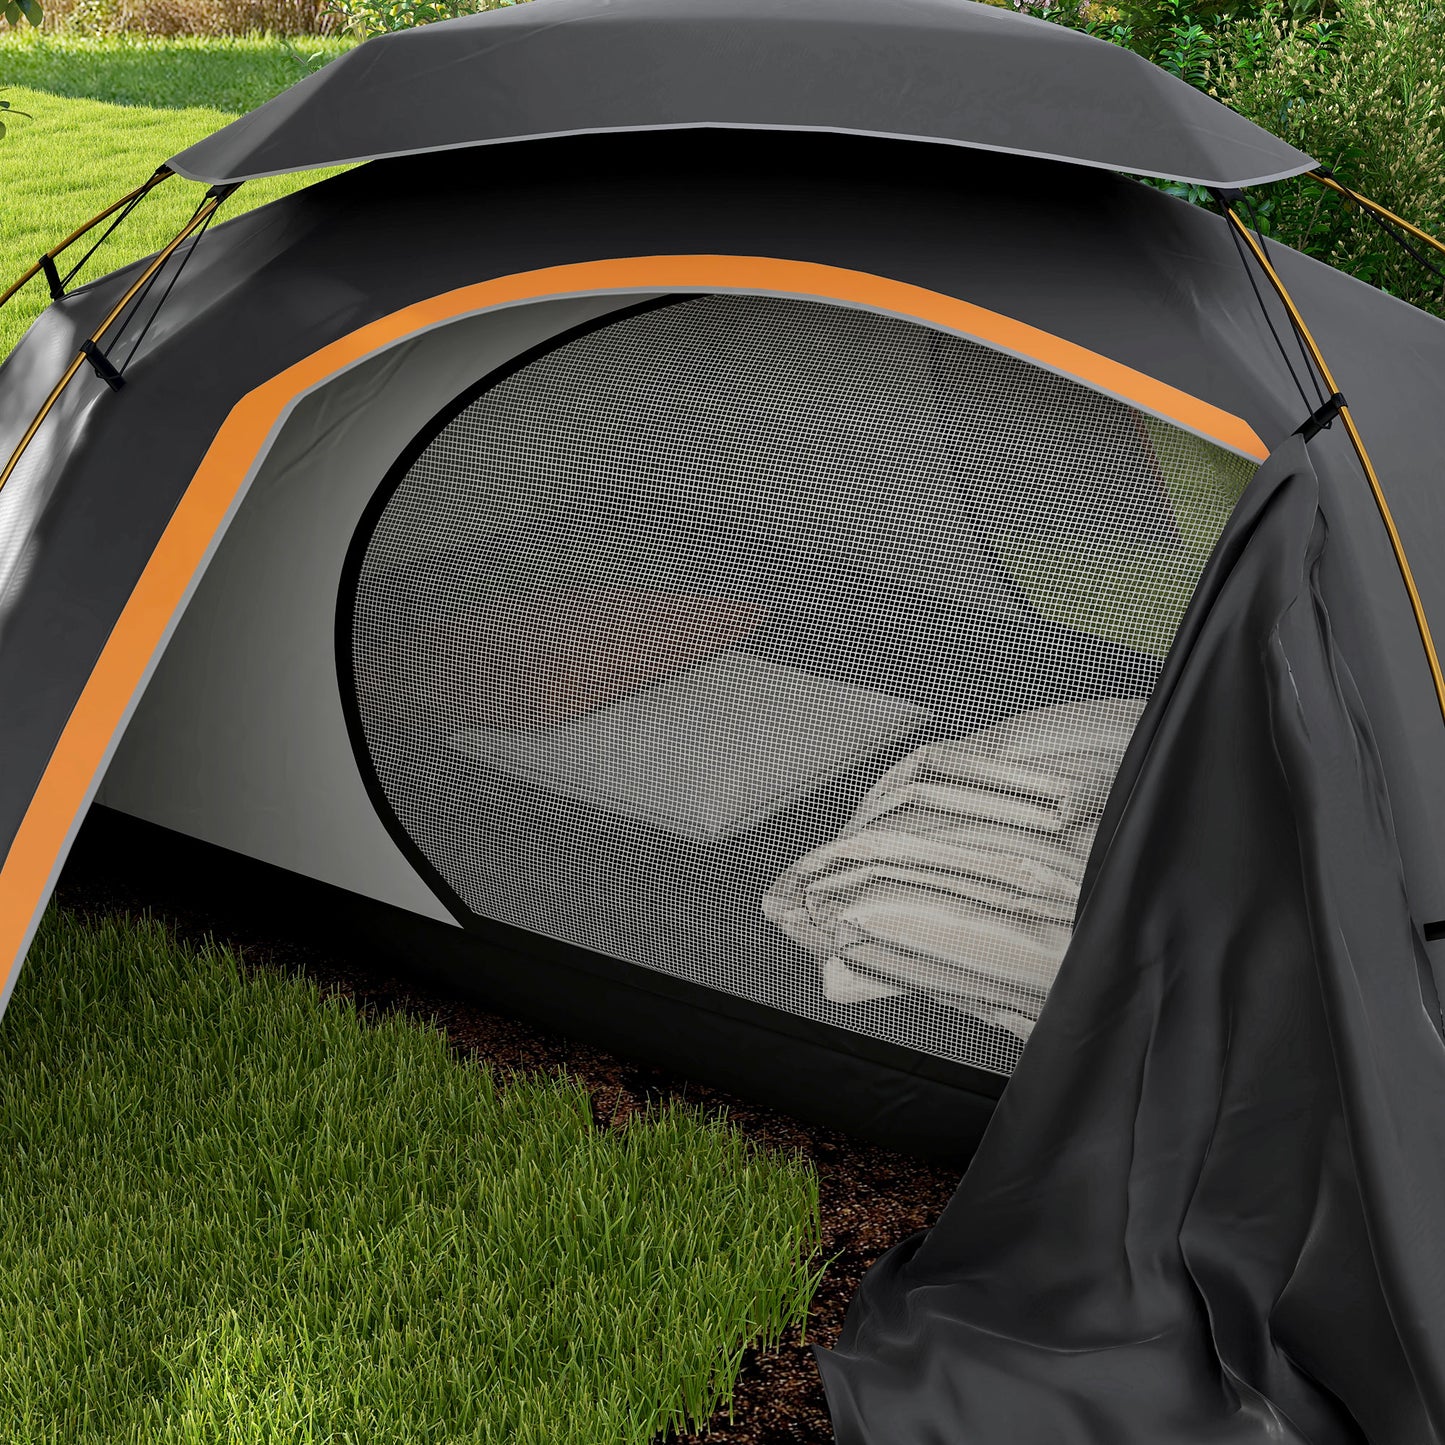 Outsunny Aluminium Frame Camping Tent Dome Tent with Removable Rainfly, 2000mm Waterproof, for 1-2 Man, Grey